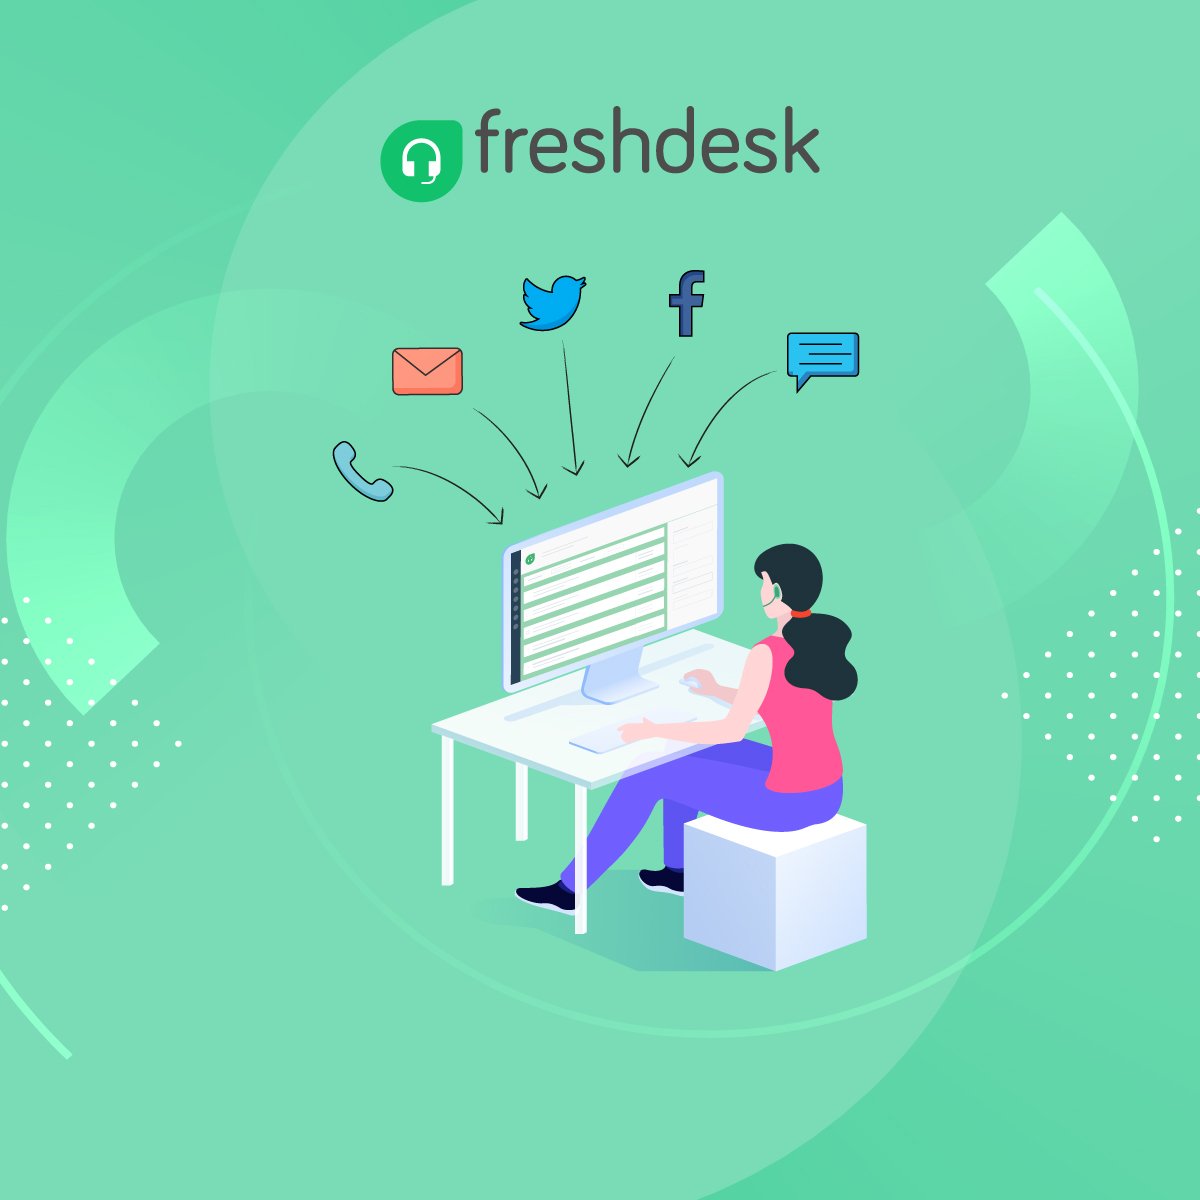 Freshdesk is a cloud-based customer service software that enables businesses of all sizes to deliver stellar customer support.